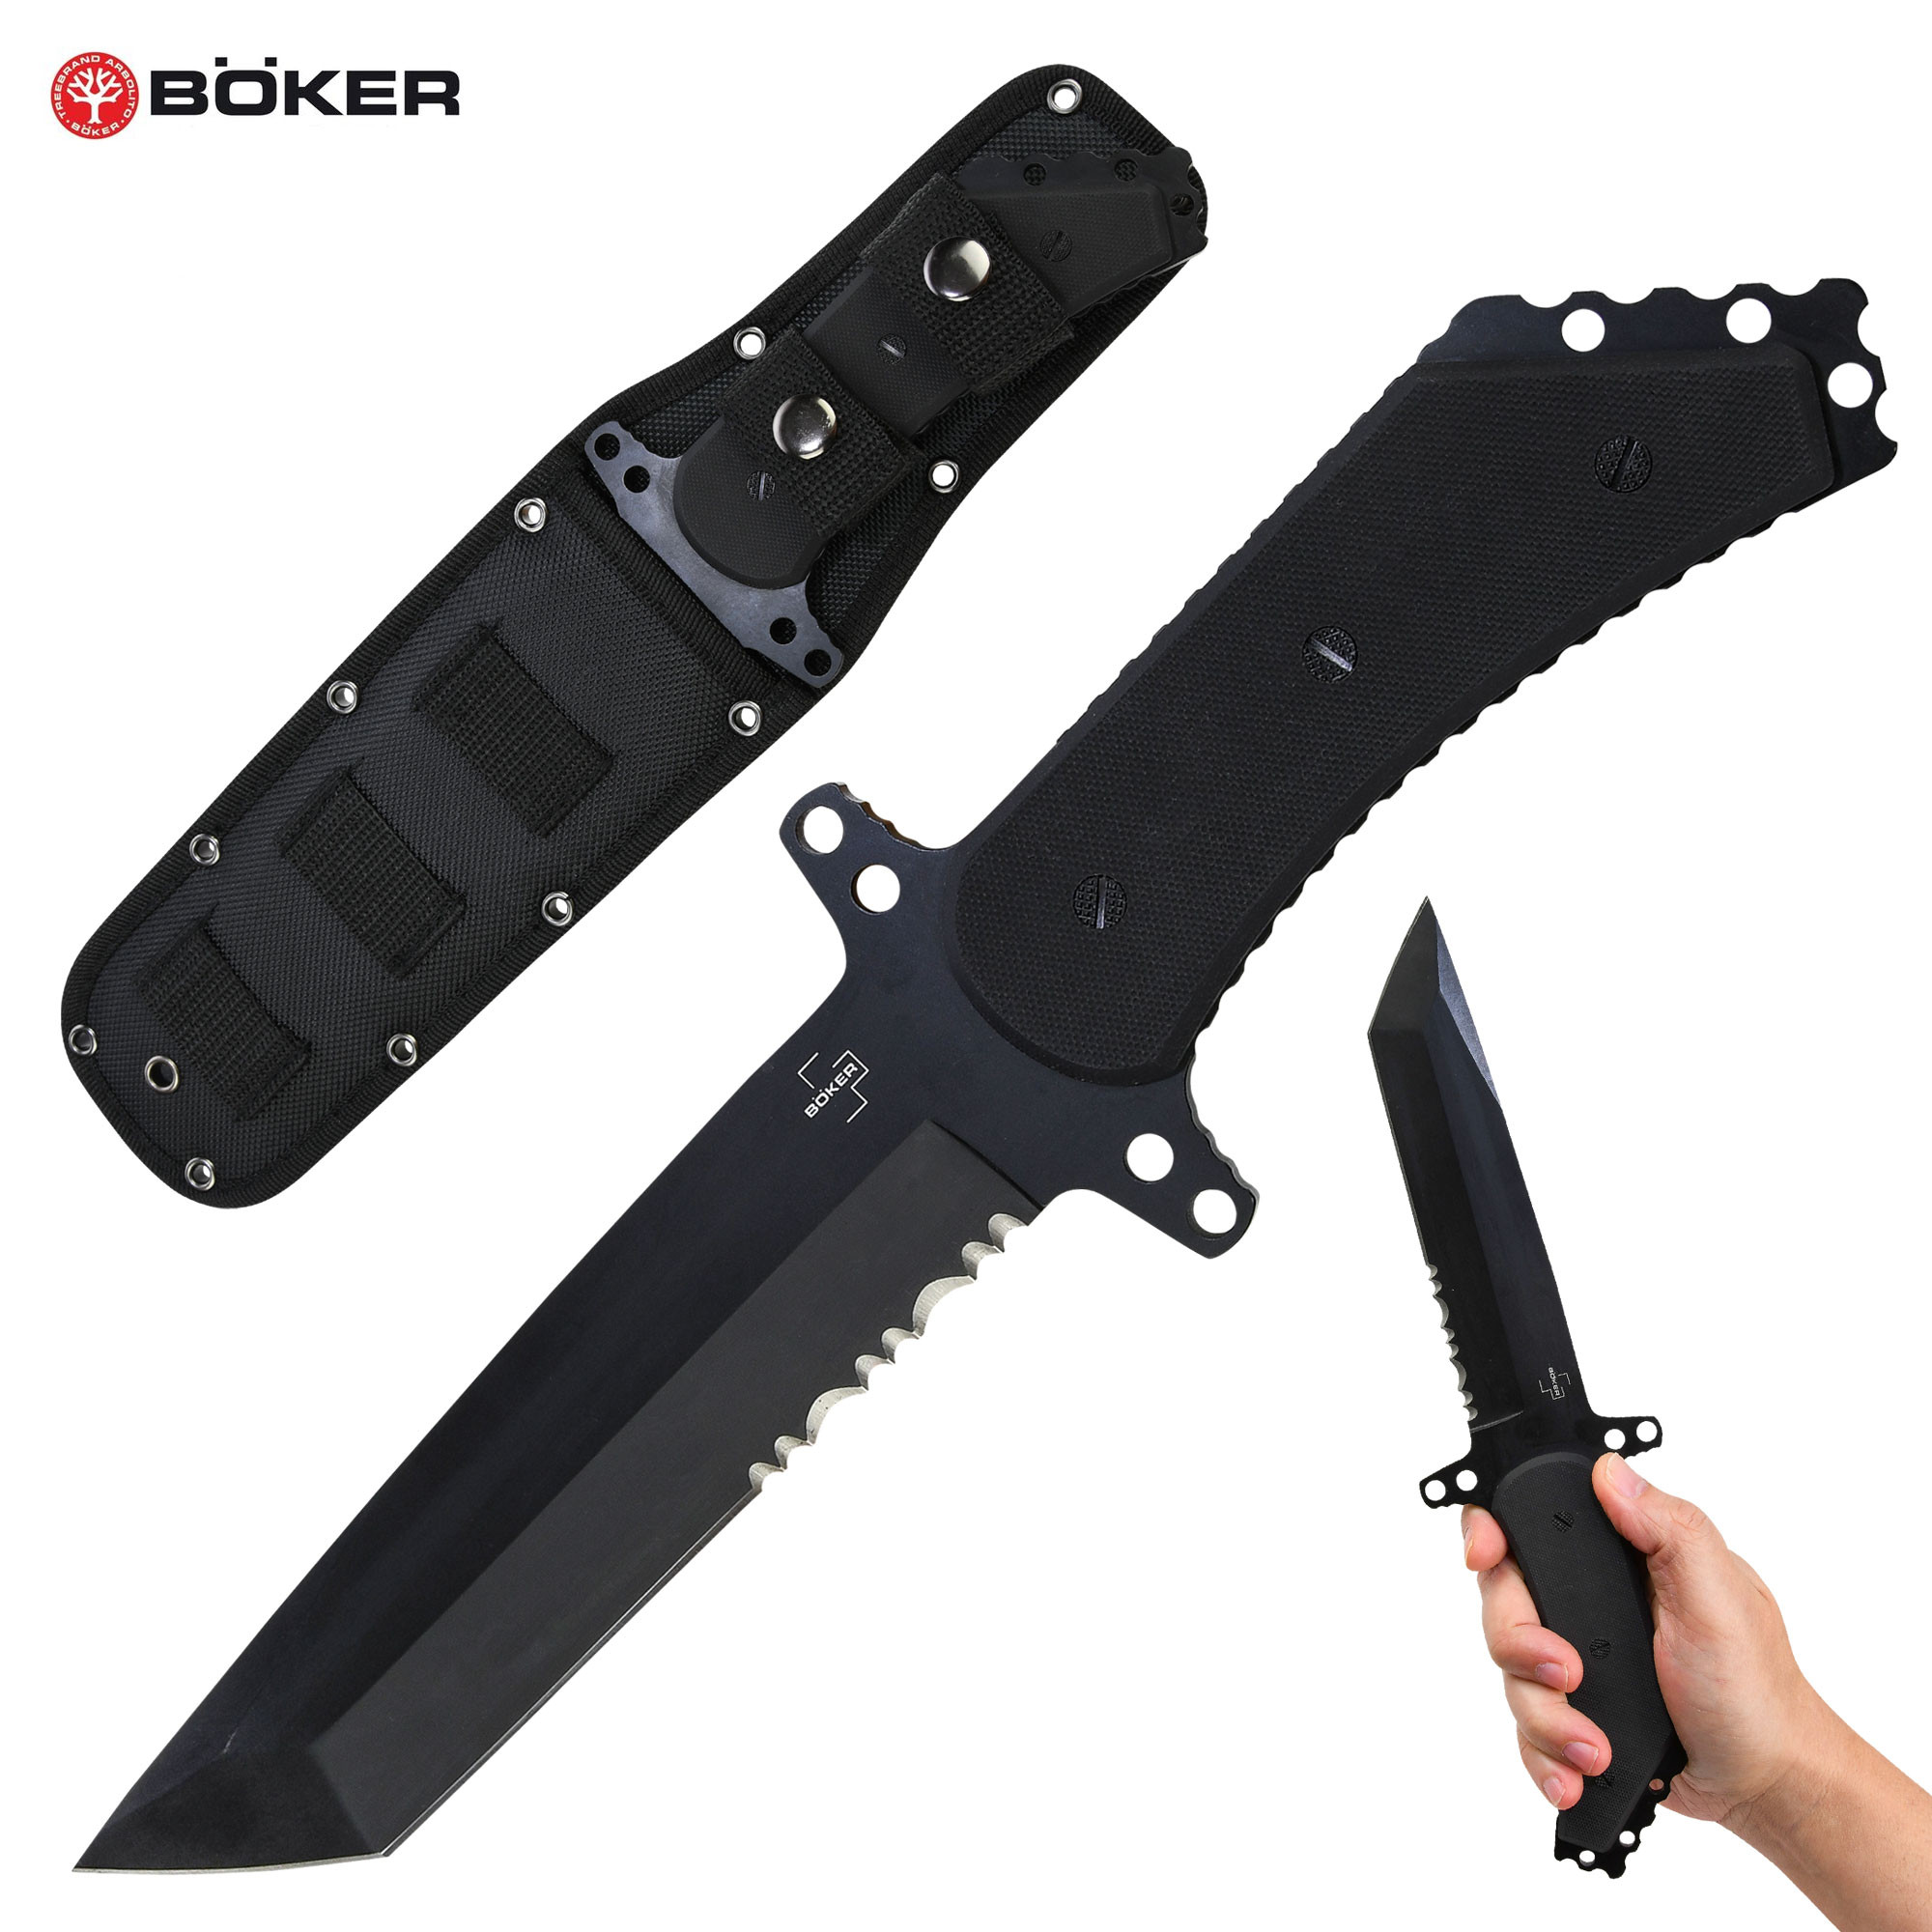 Boker Plus 440C Armed Forces Tactical Fixed Blade Knife $39.99 + Free Shipping